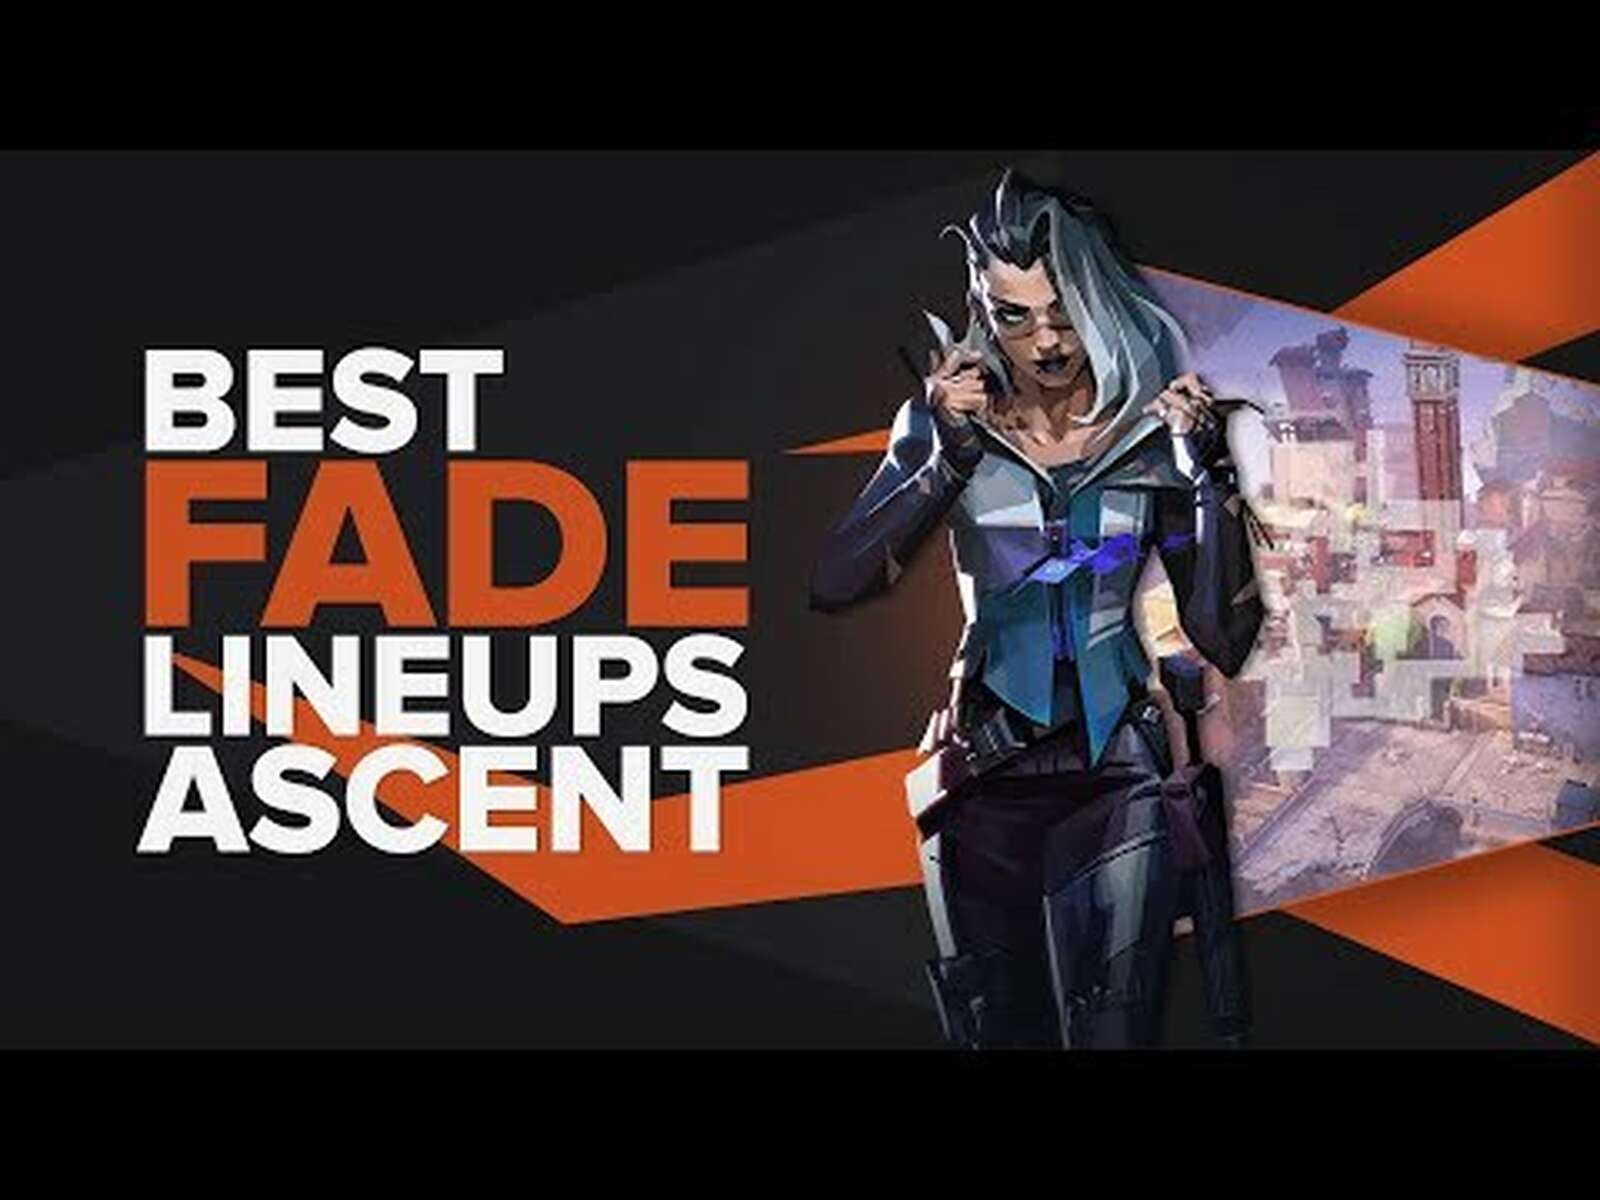 The Best Fade Lineups on Ascent